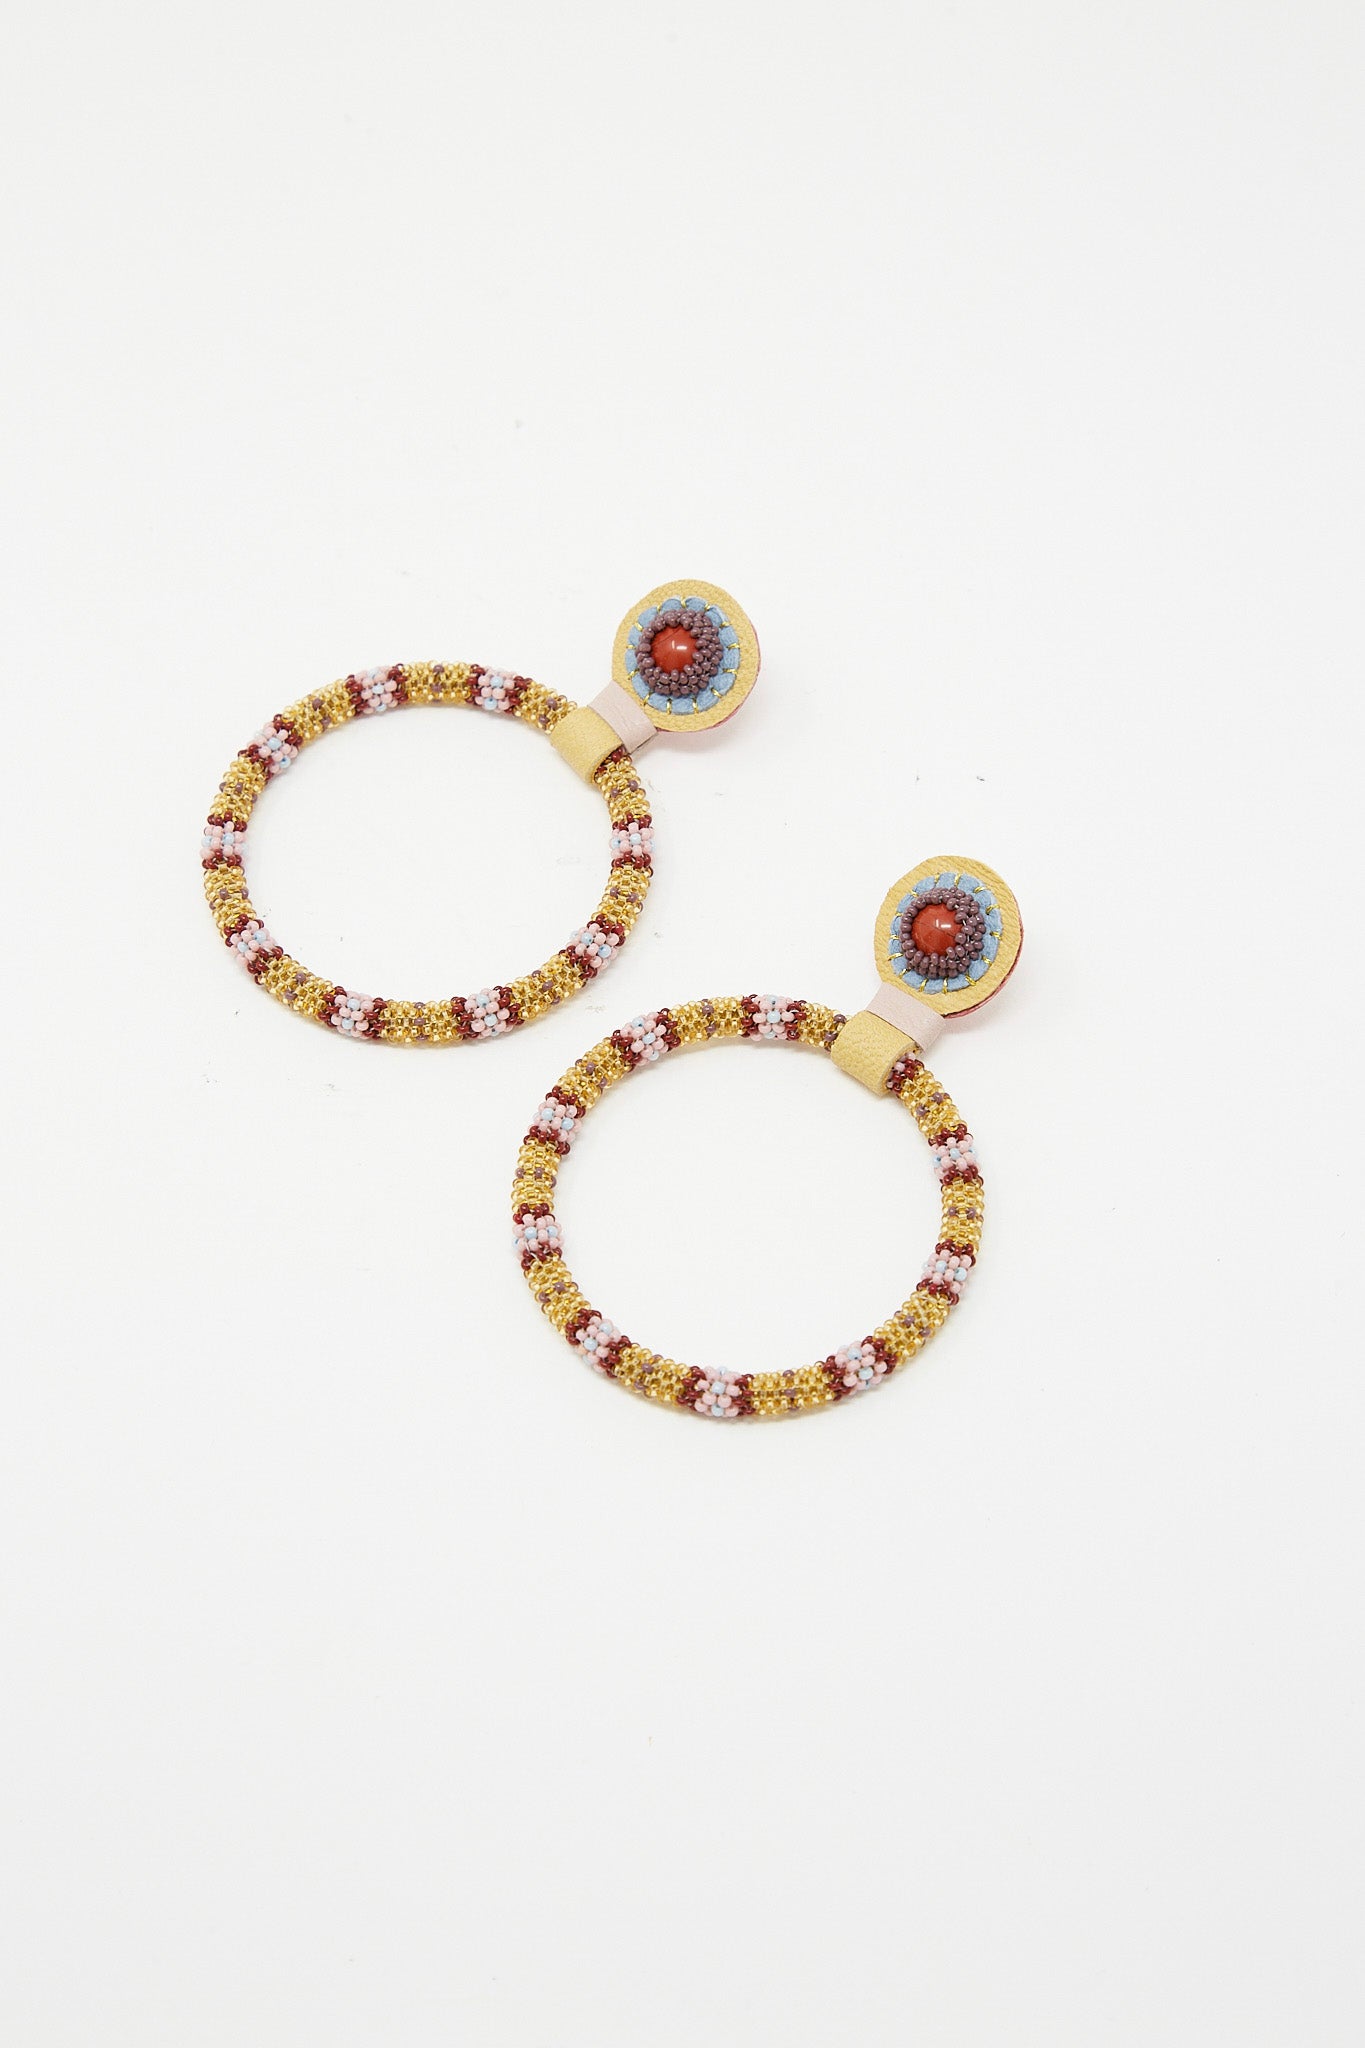 A pair of Large Beaded Hoops in Red Jasper Stones by Robin Mollicone with red and blue beads.